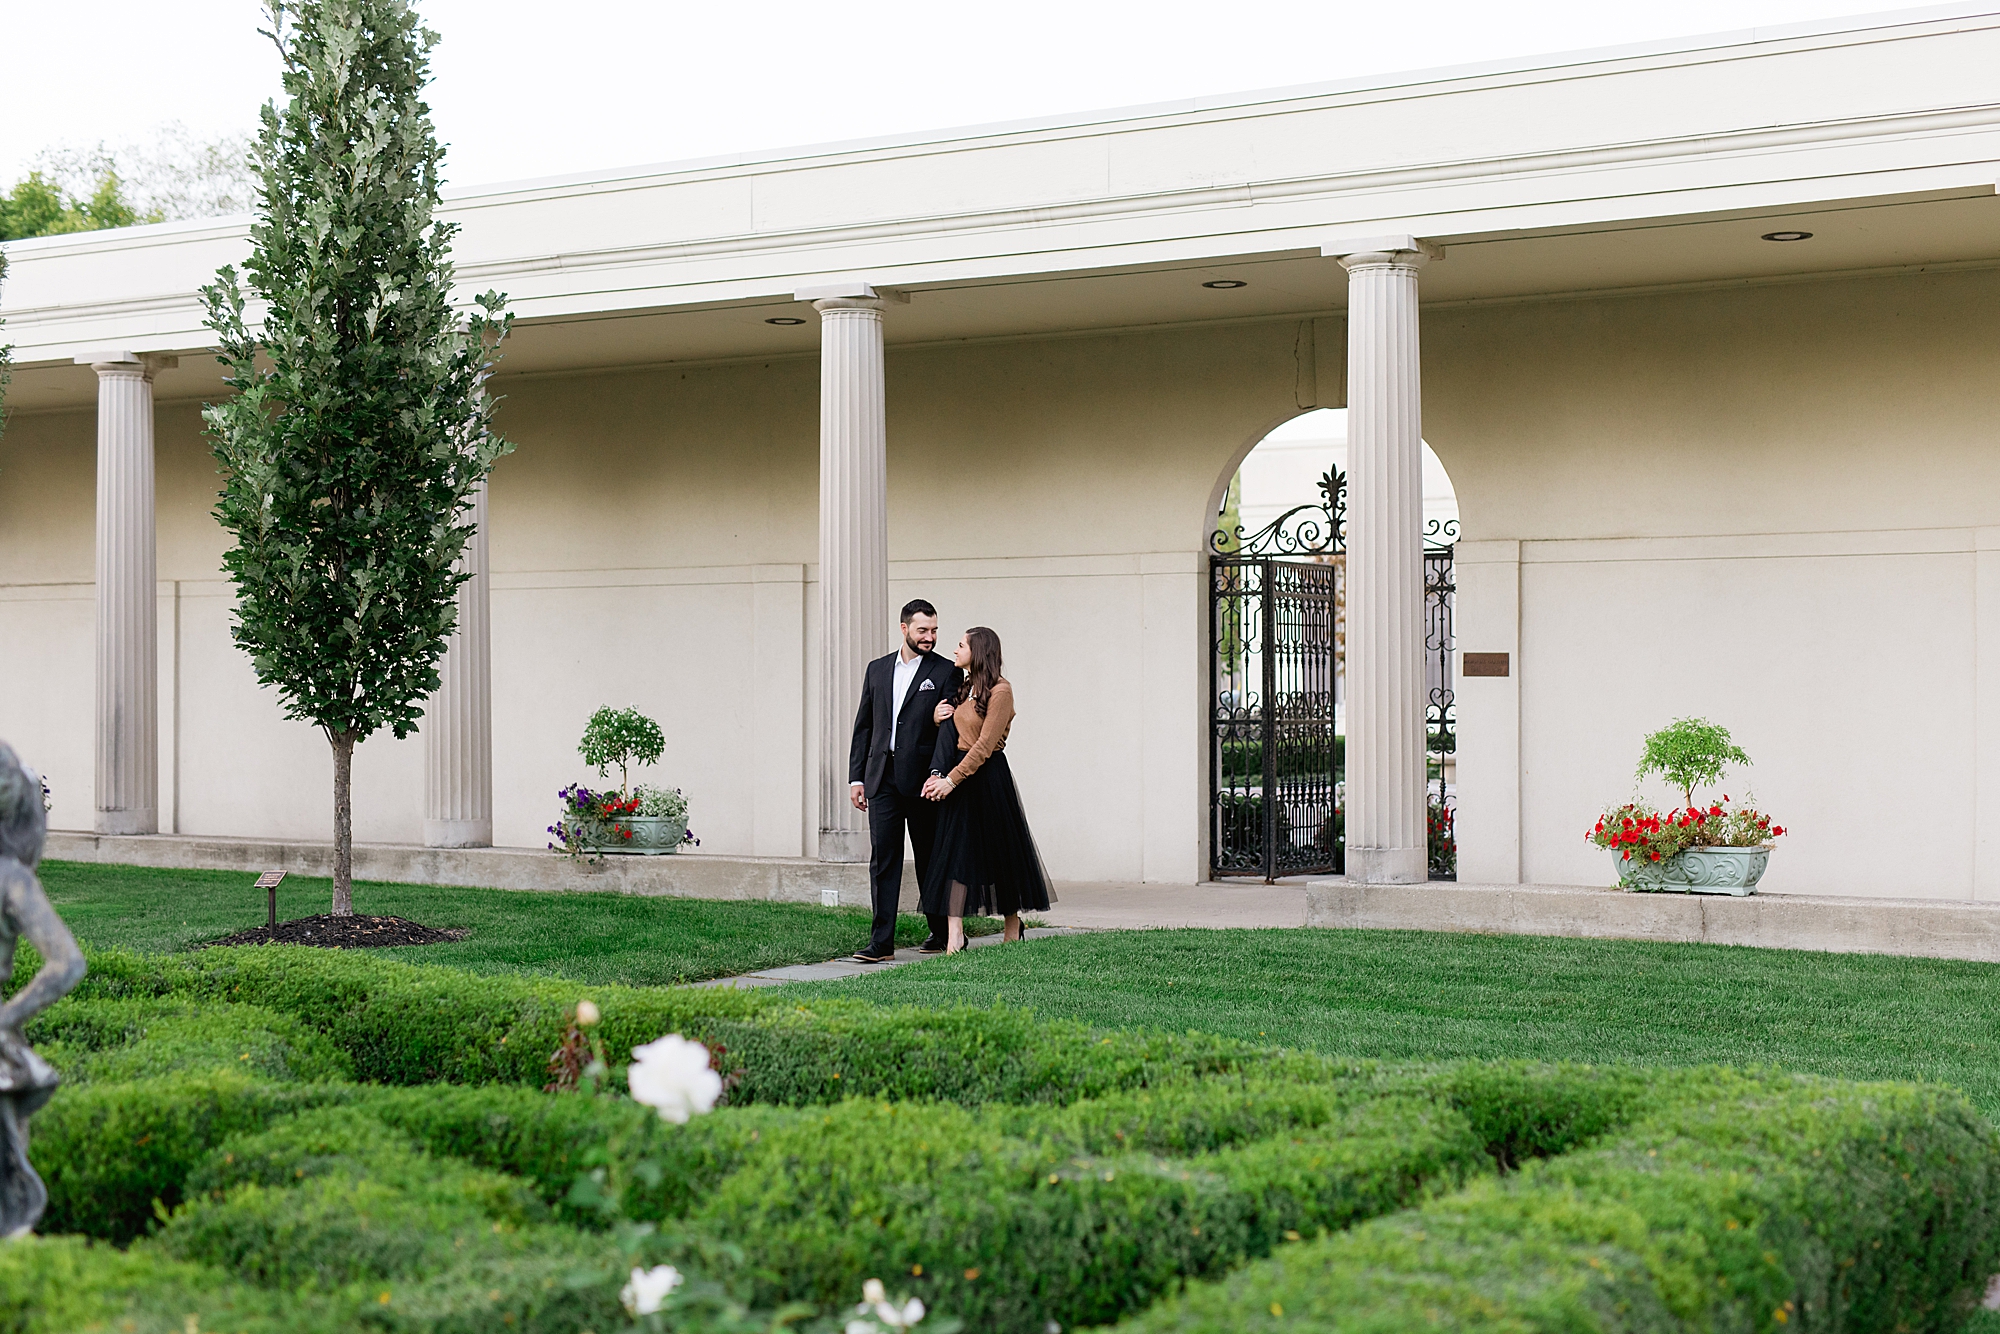 Elegant engagement session with golden retriever dog at War Memorial - Breanne Rochelle Photography